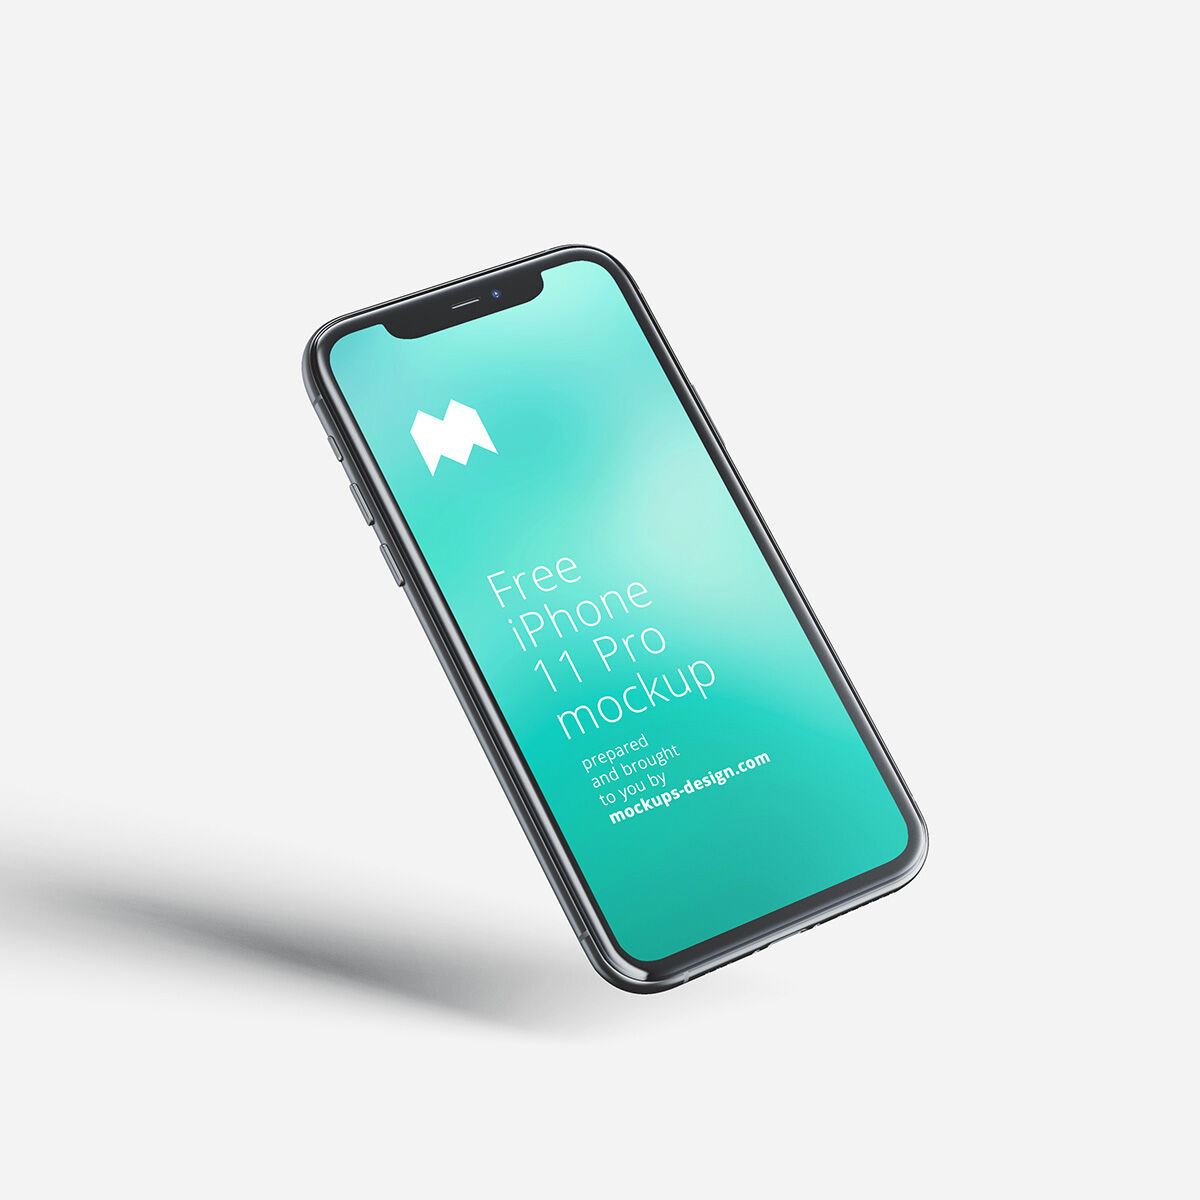 Floating Iphone 11 Pro Mockup On A White Background FREE PSD